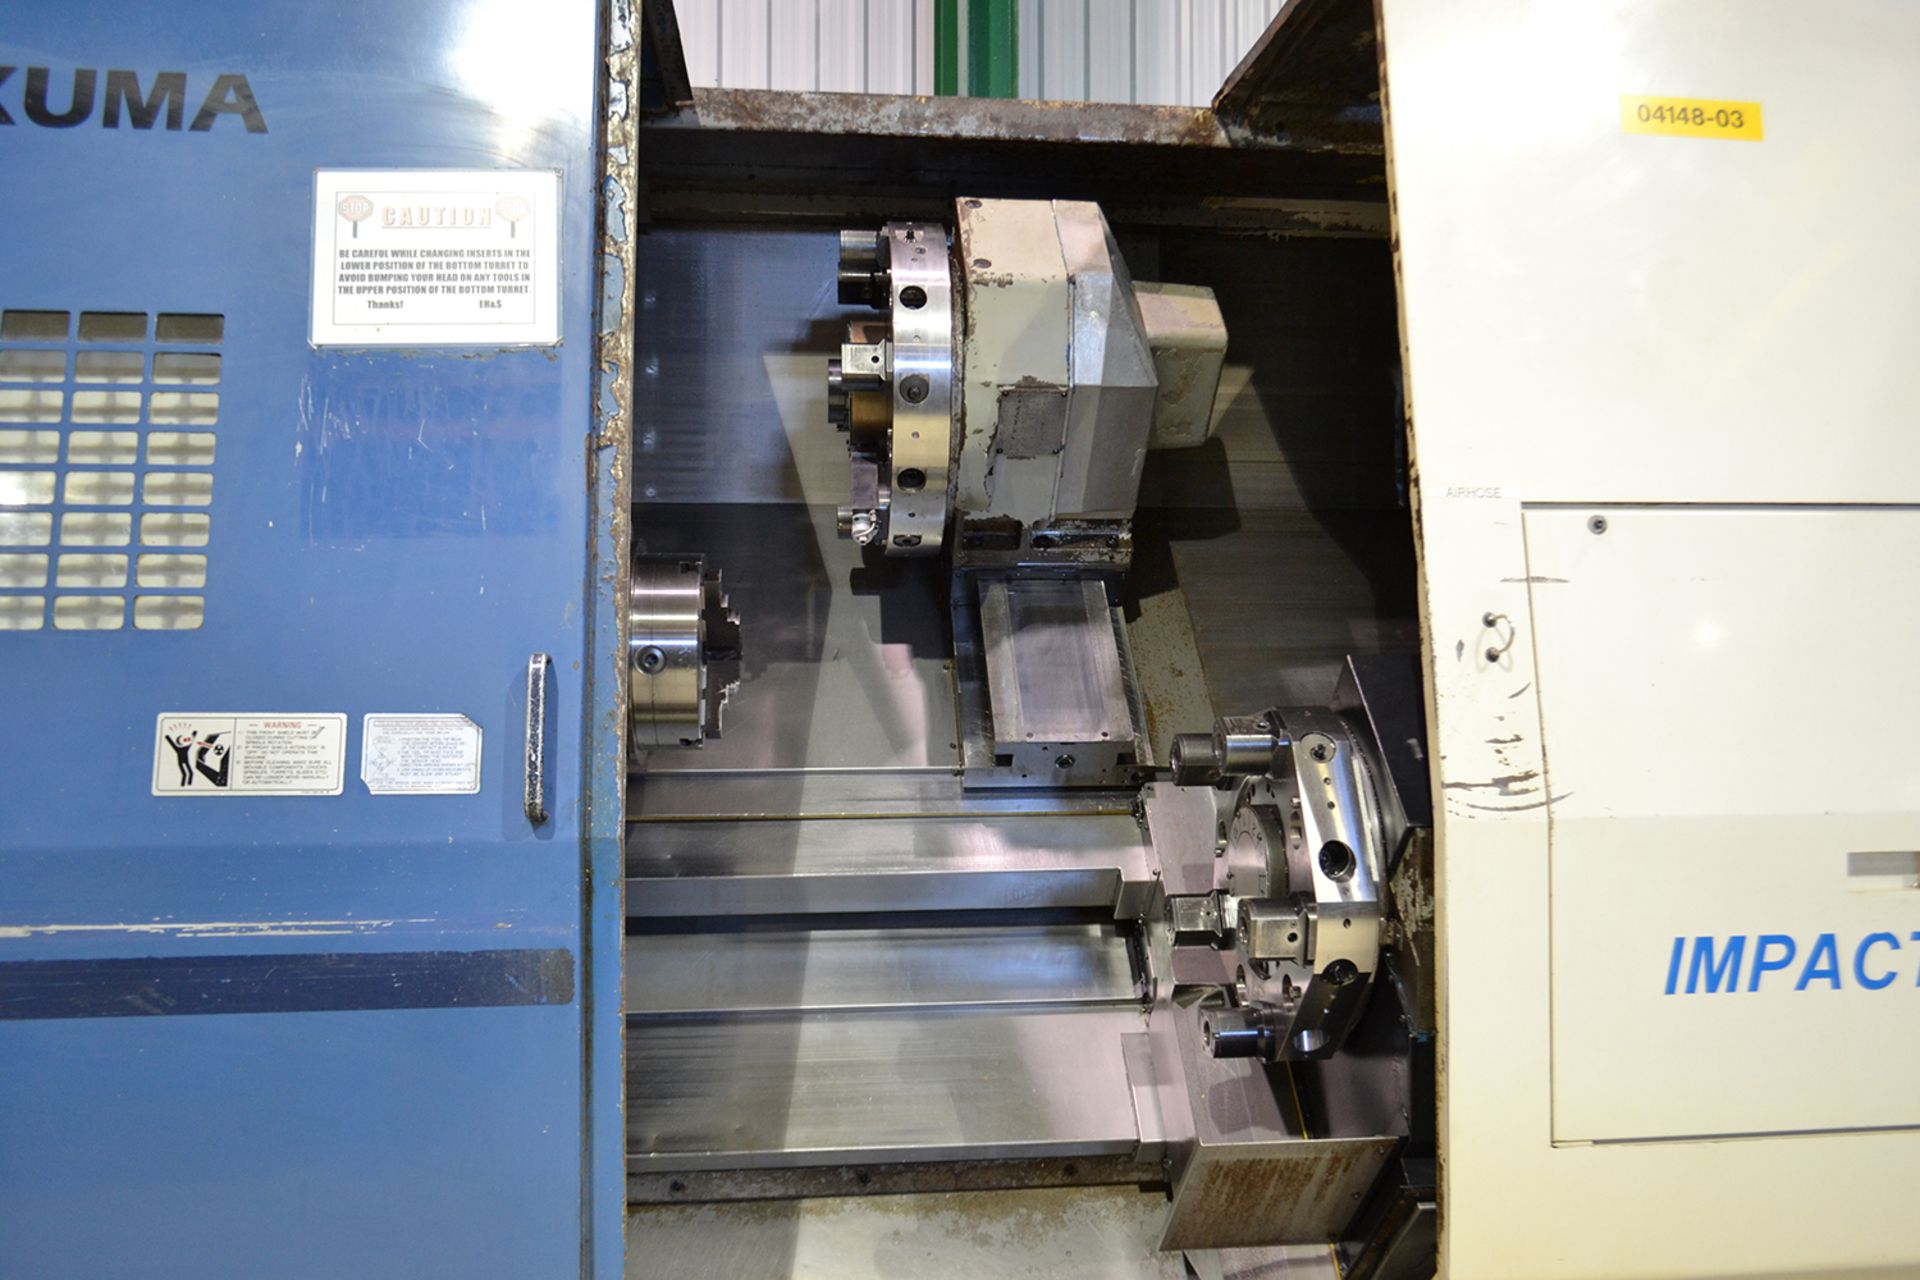 OKUMA IMPACT LU35, TWIN TURRET CNC LATHE, SWING OVER BED: 29.13", DISTANCE BETWEEN CENTERS 33.46", - Image 3 of 21